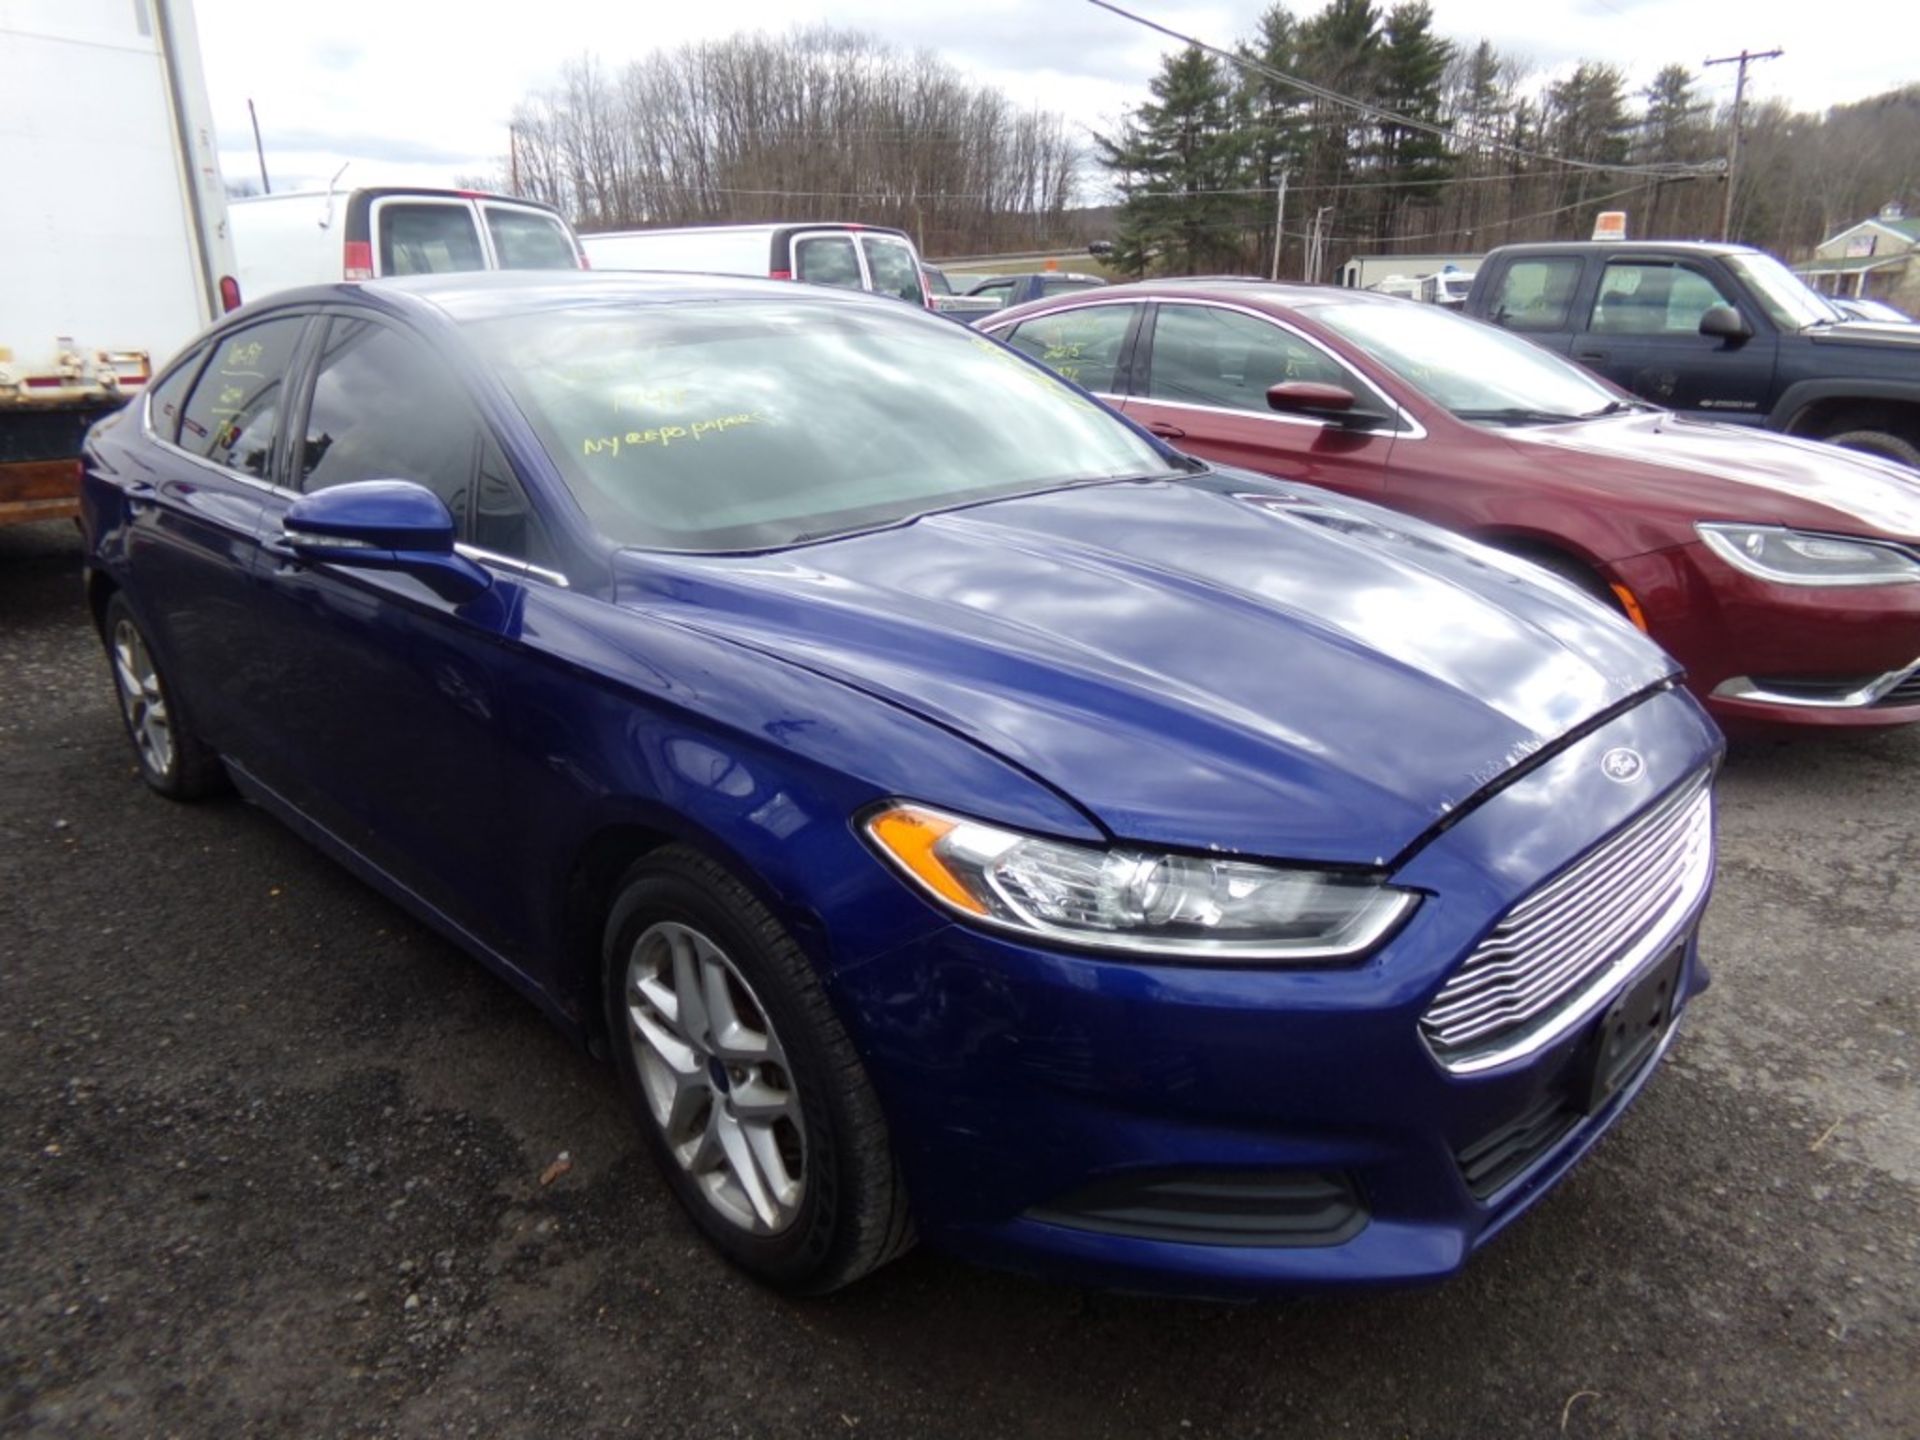 2014 Ford Fusion SE, Blue, 174,739 Miles, VIN#1FA6P0H7XE5365423, AIR BAG LIGHT IS ON, MINOR DAMAGE - Image 8 of 18